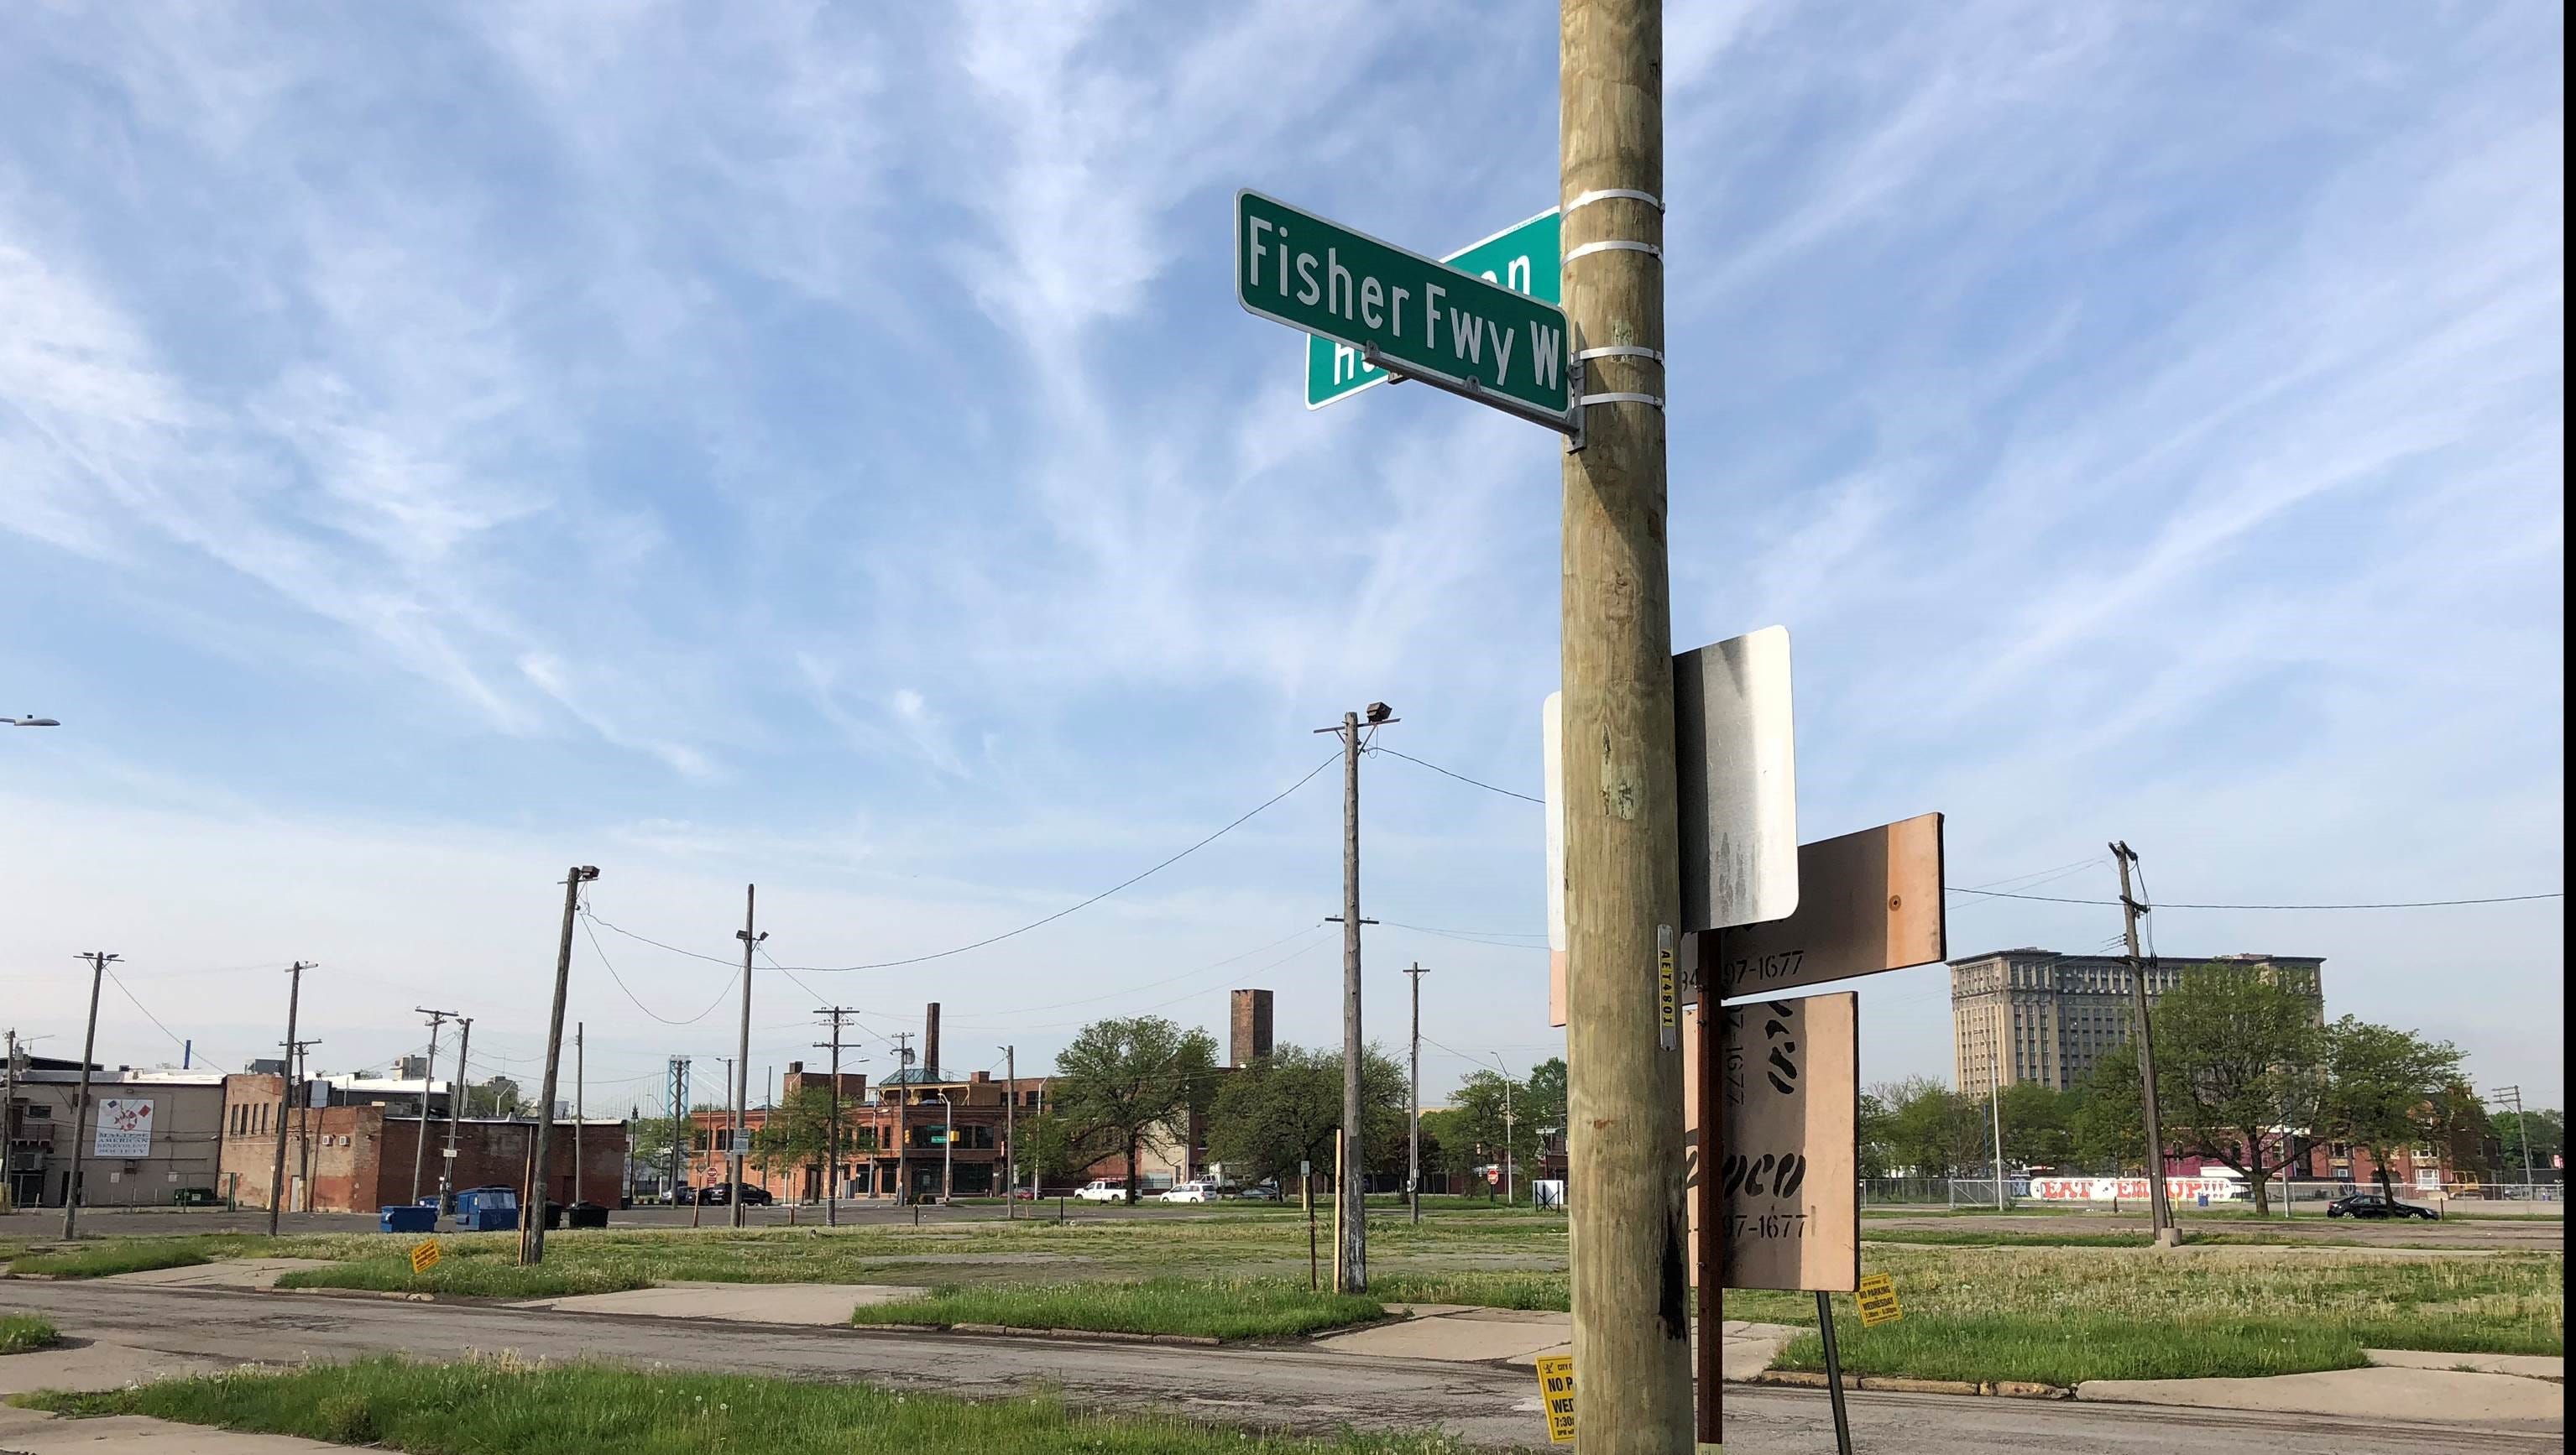 Ford Motor Co. is considering building a parking deck on the empty Corktown lots near the Michigan Central Depot, which it purchased from the Moroun family this week.